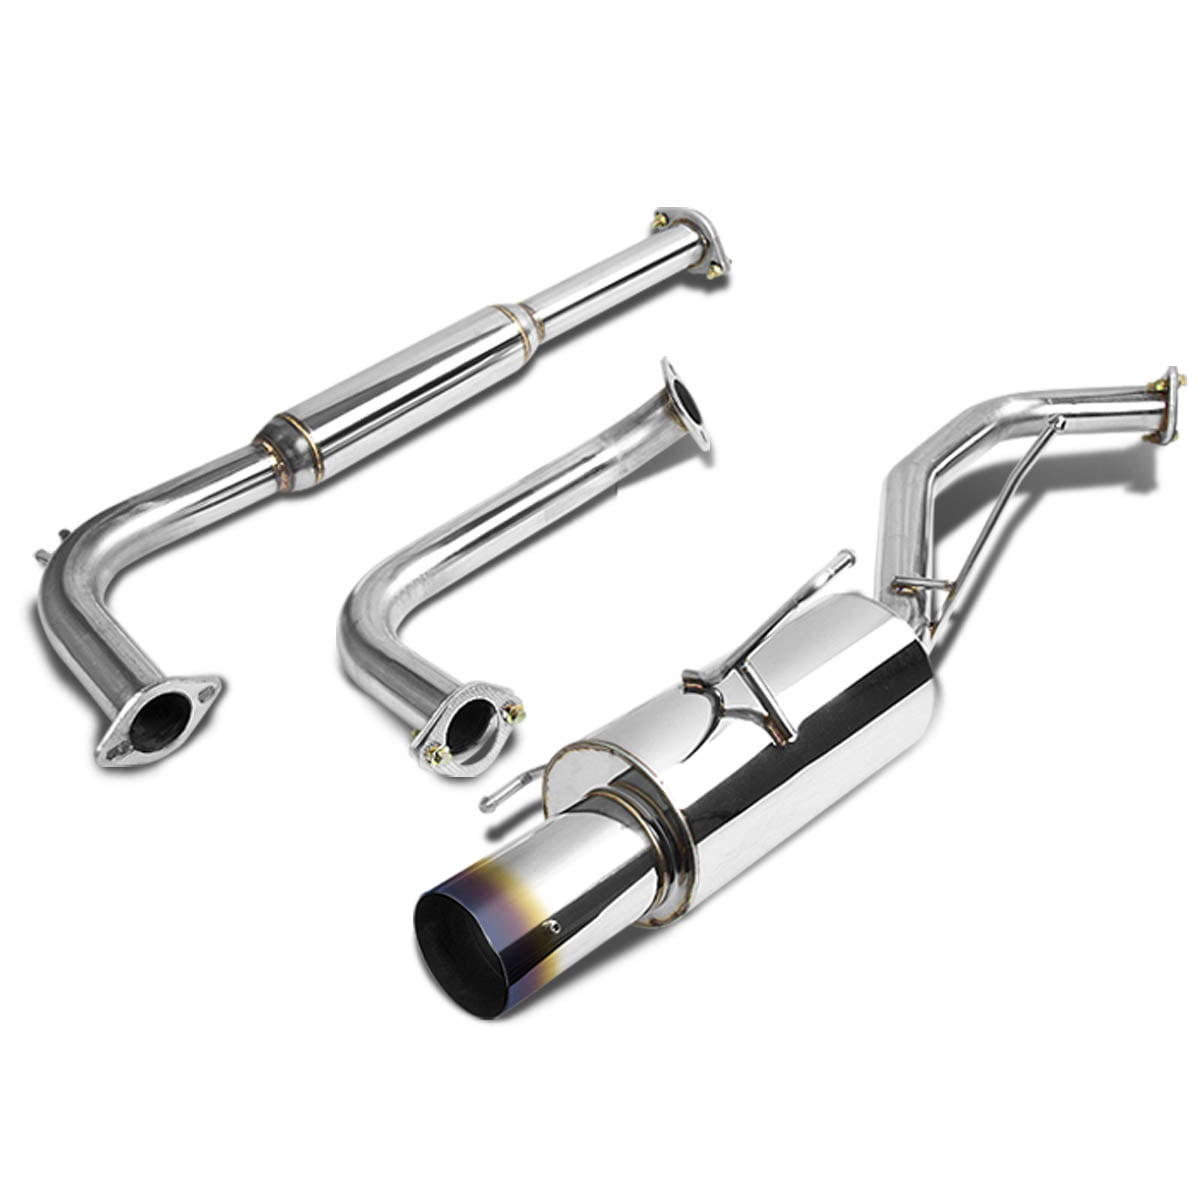 From 11/09-8/10 Compatible with 2010-2011 Nissan Maxima 3.5L V6 Left Driver Side Muffler 